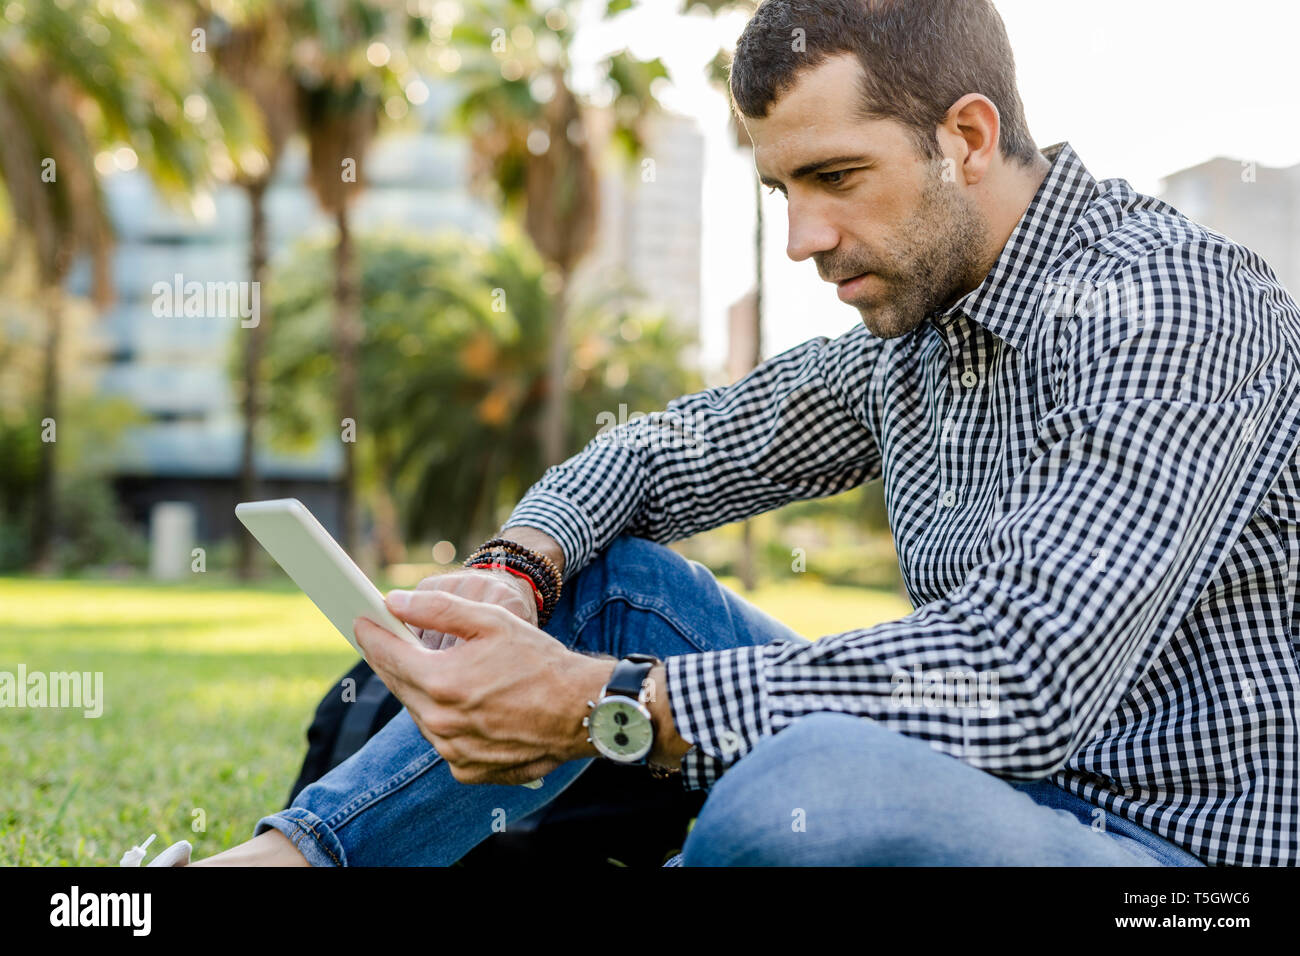 Man sitting on meadow in city park looking at digital tablet Stock Photo